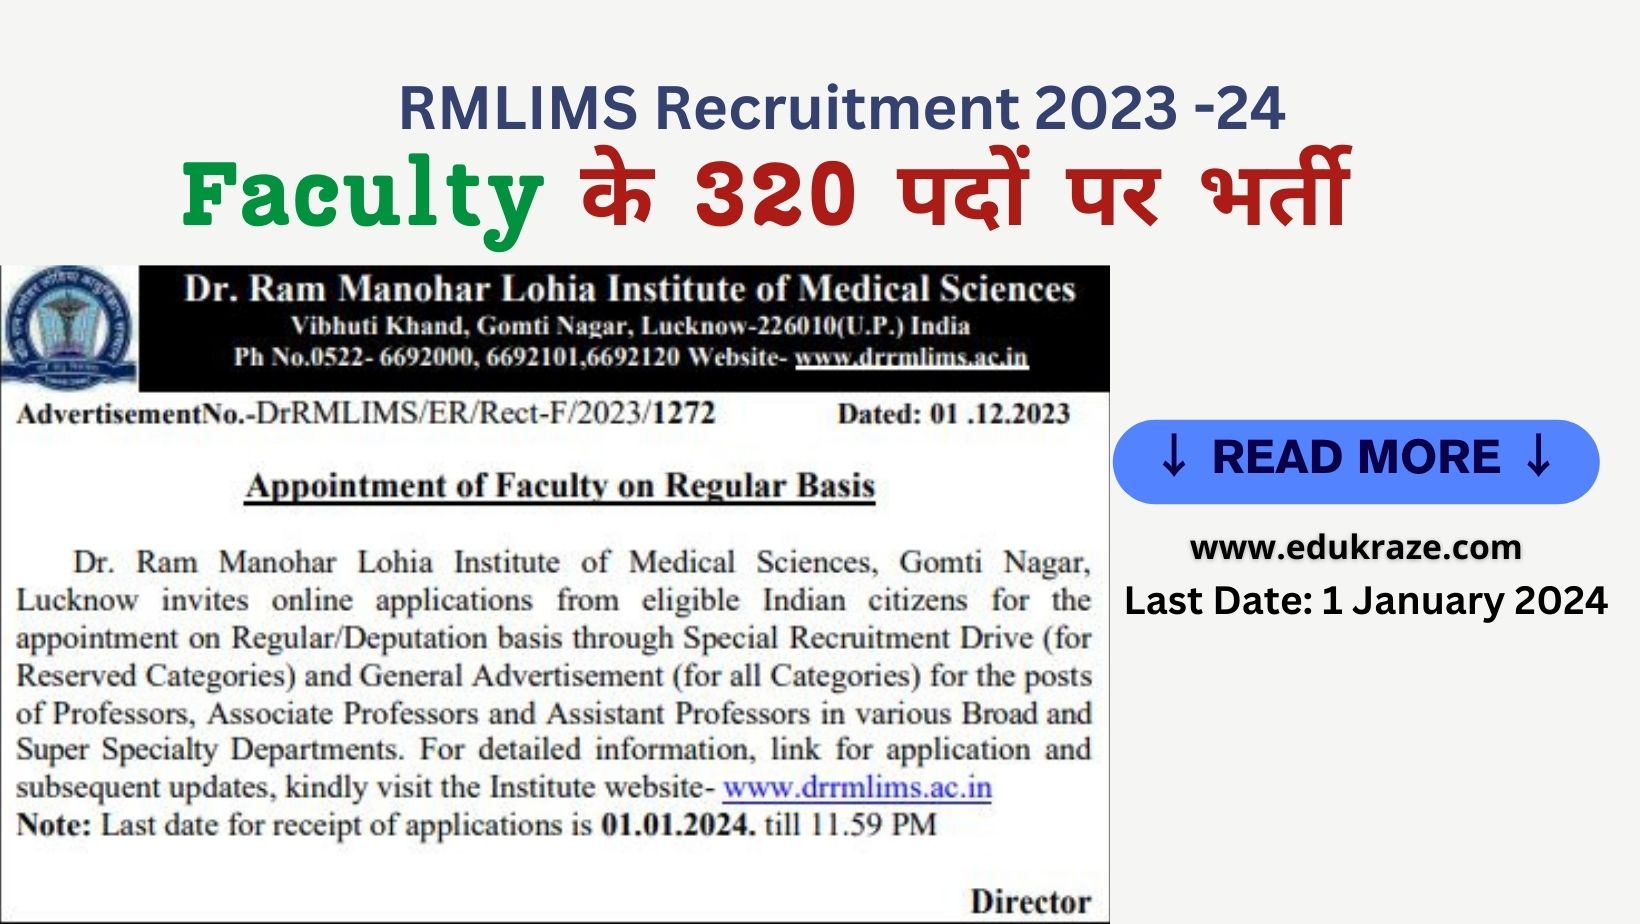 RMLIMS Recruitment 2023 out for 320 Faculty Vacancies